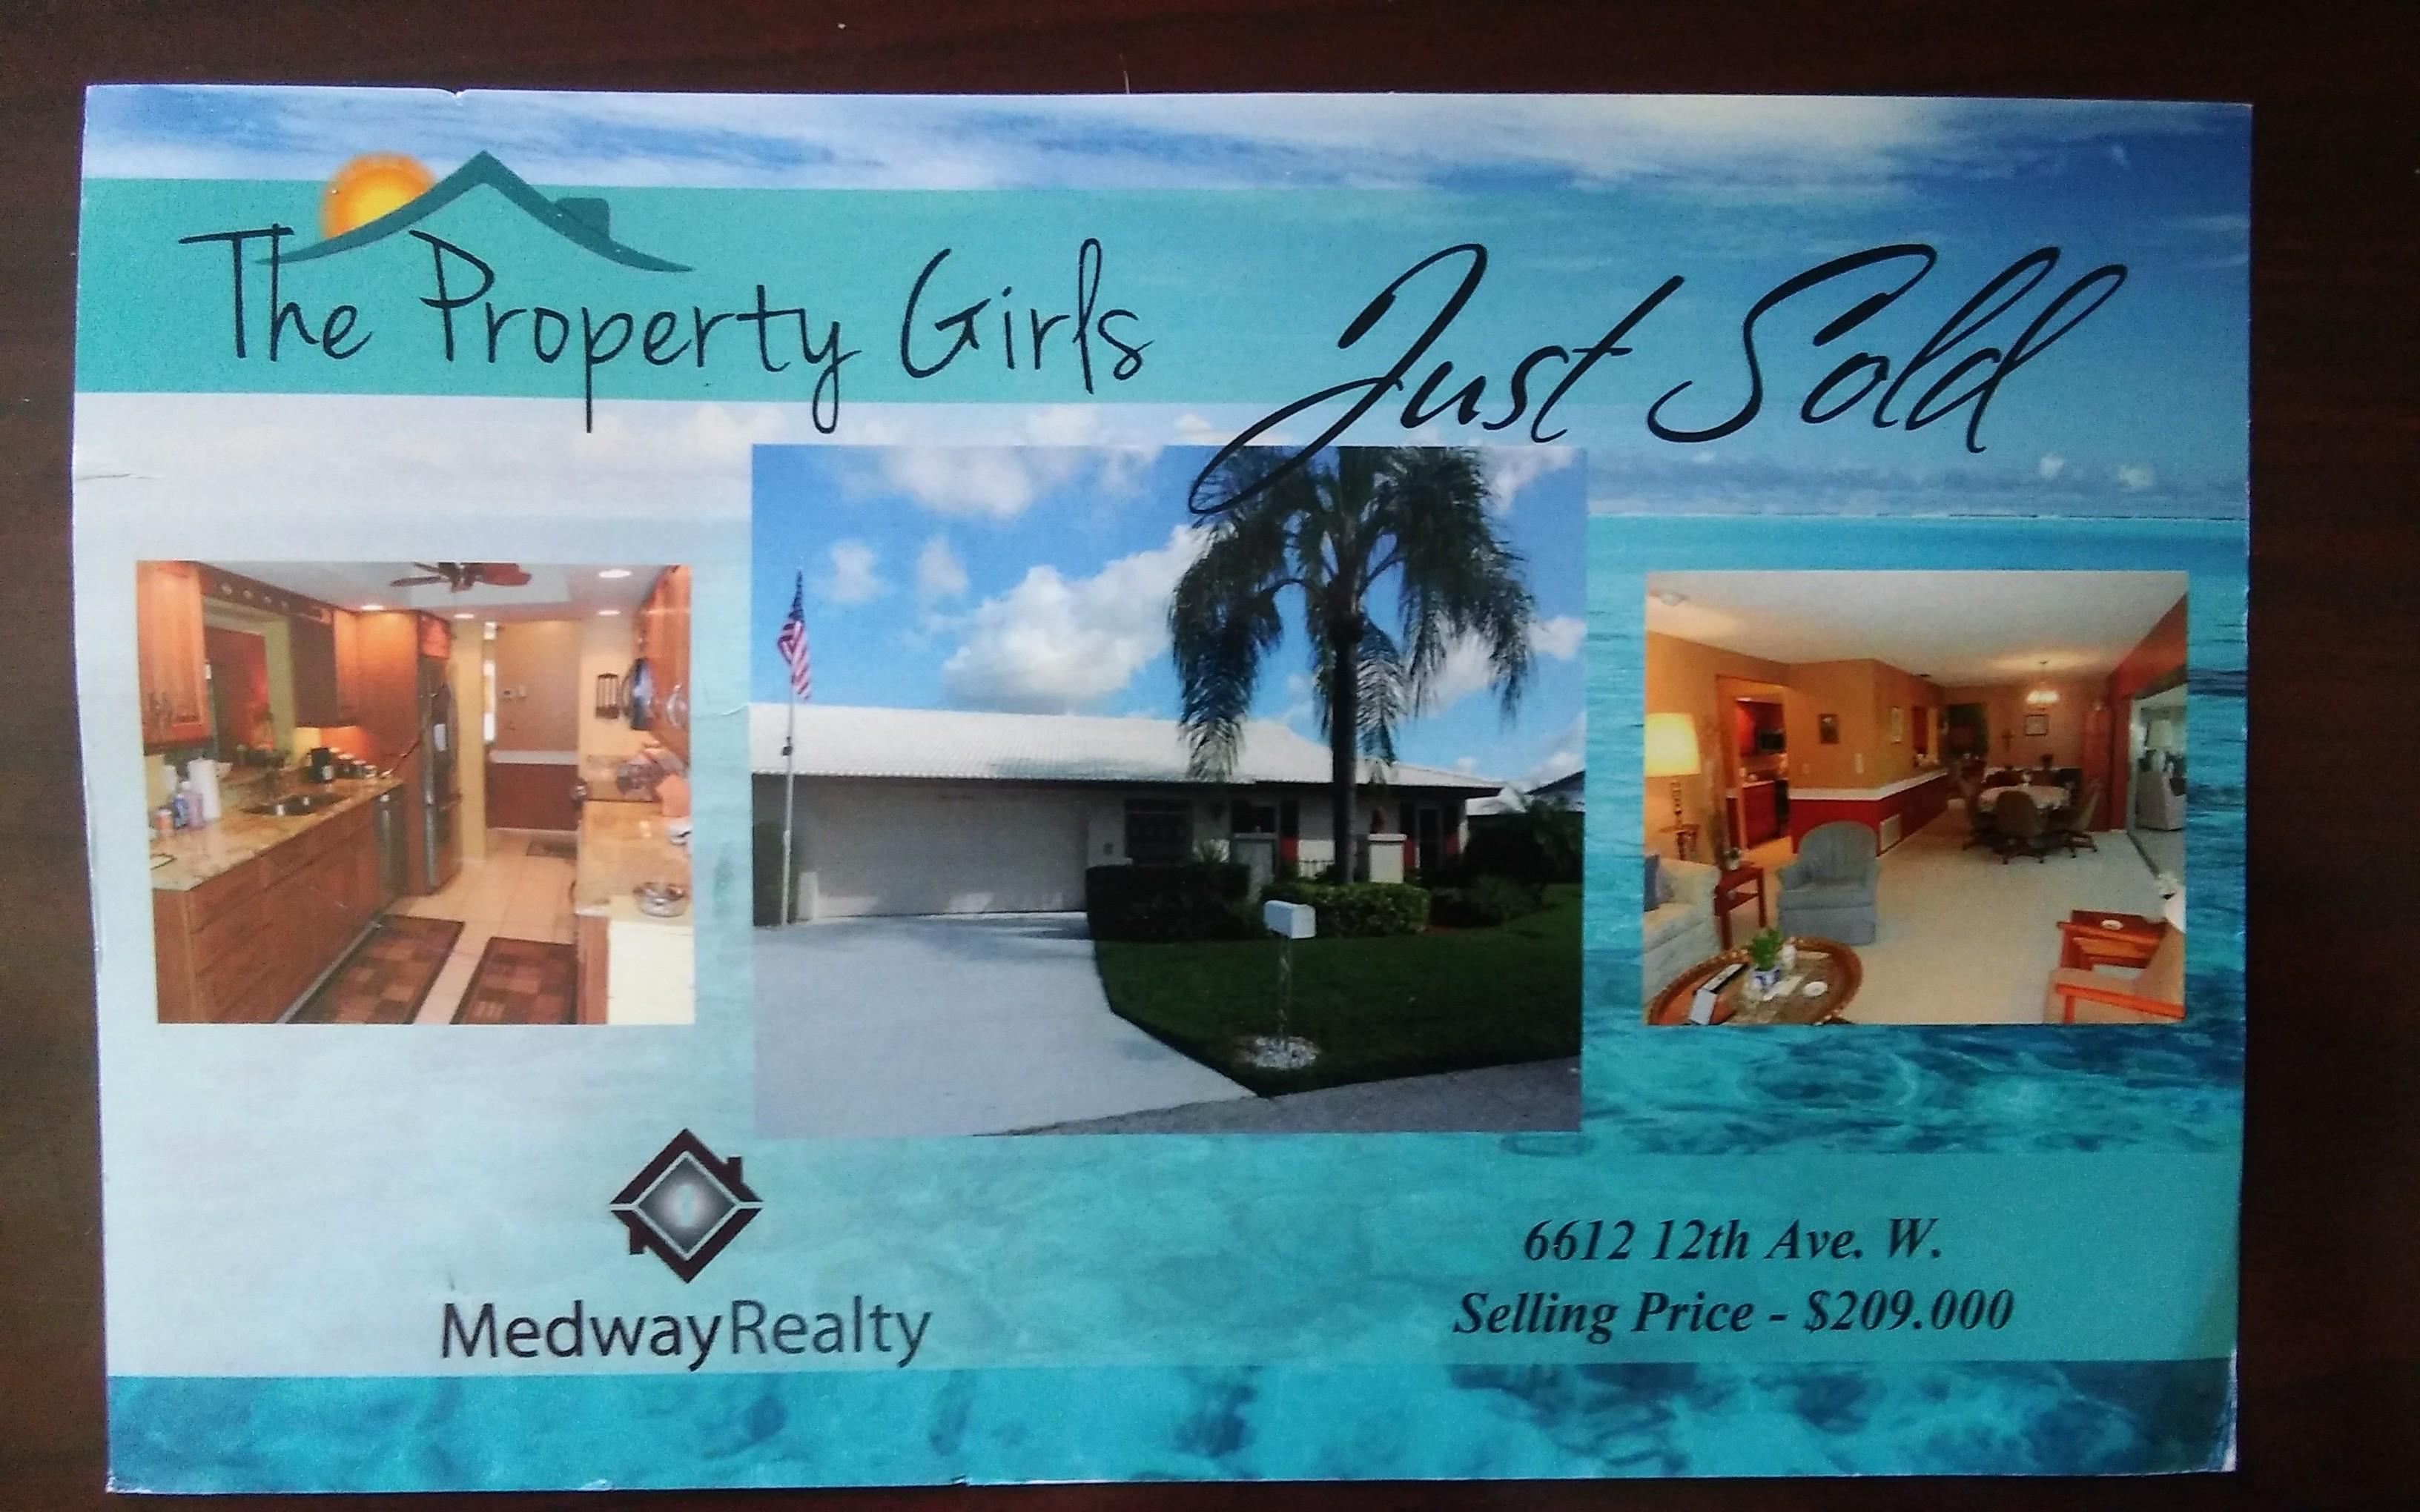 The Property Girls Of Medway Realty Photo